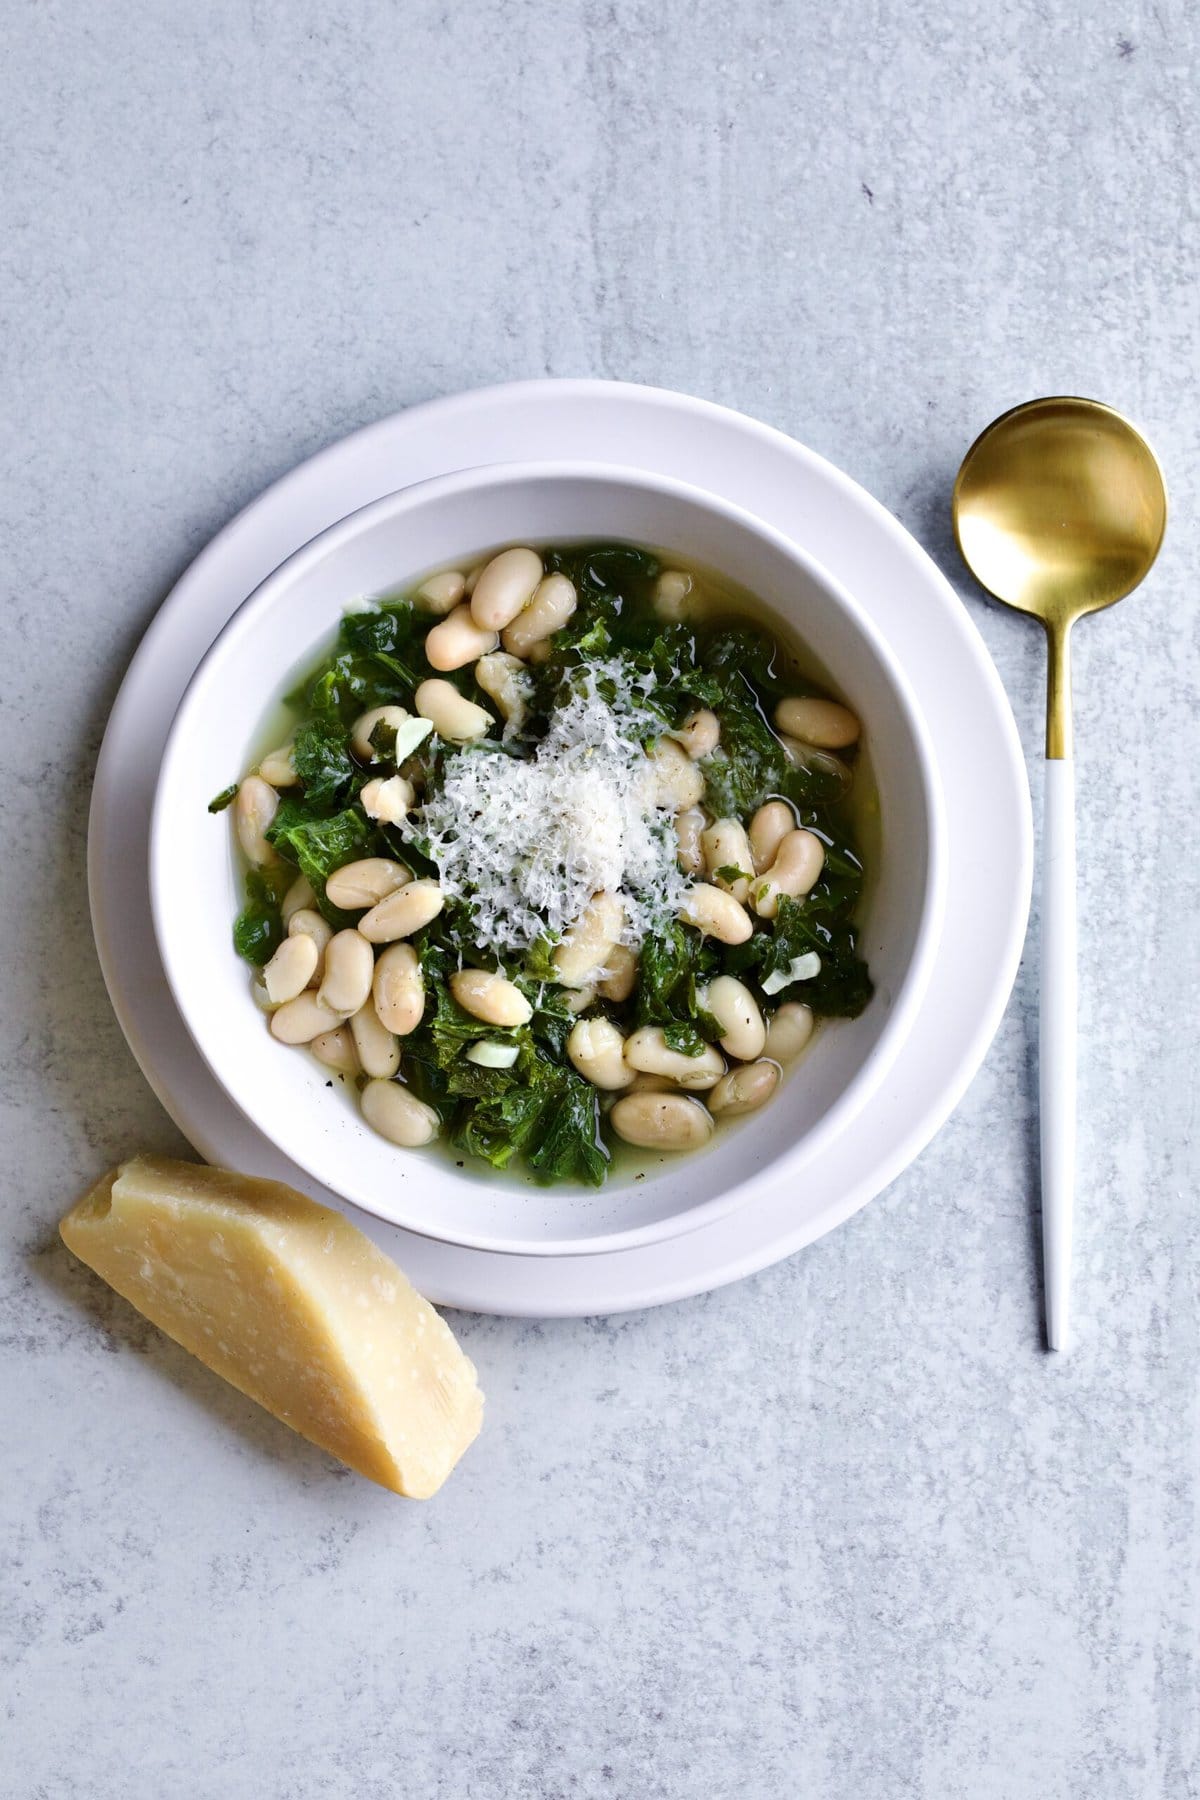 Italian beans and greens soup in a bowl with a gold and white spoon. Piece of parm cheese next to bowl.